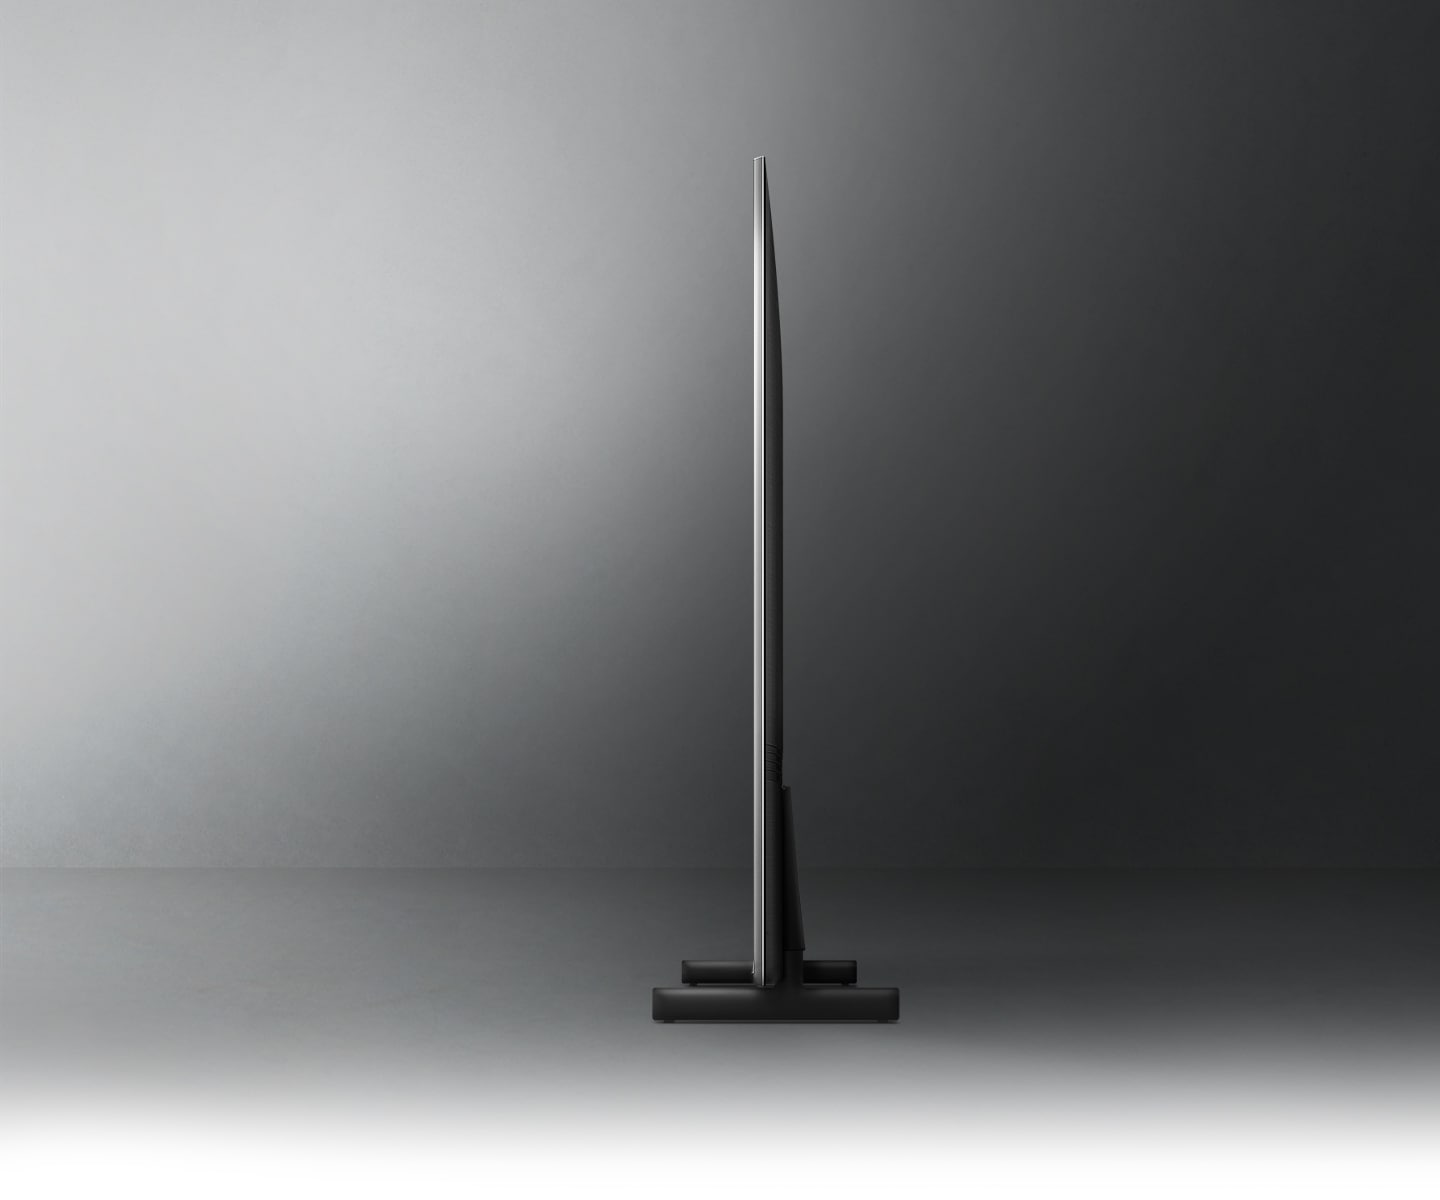 The Crystal UHD TV profile view shows the ultra-slim design of the Crystal UHD TV AirSlim.